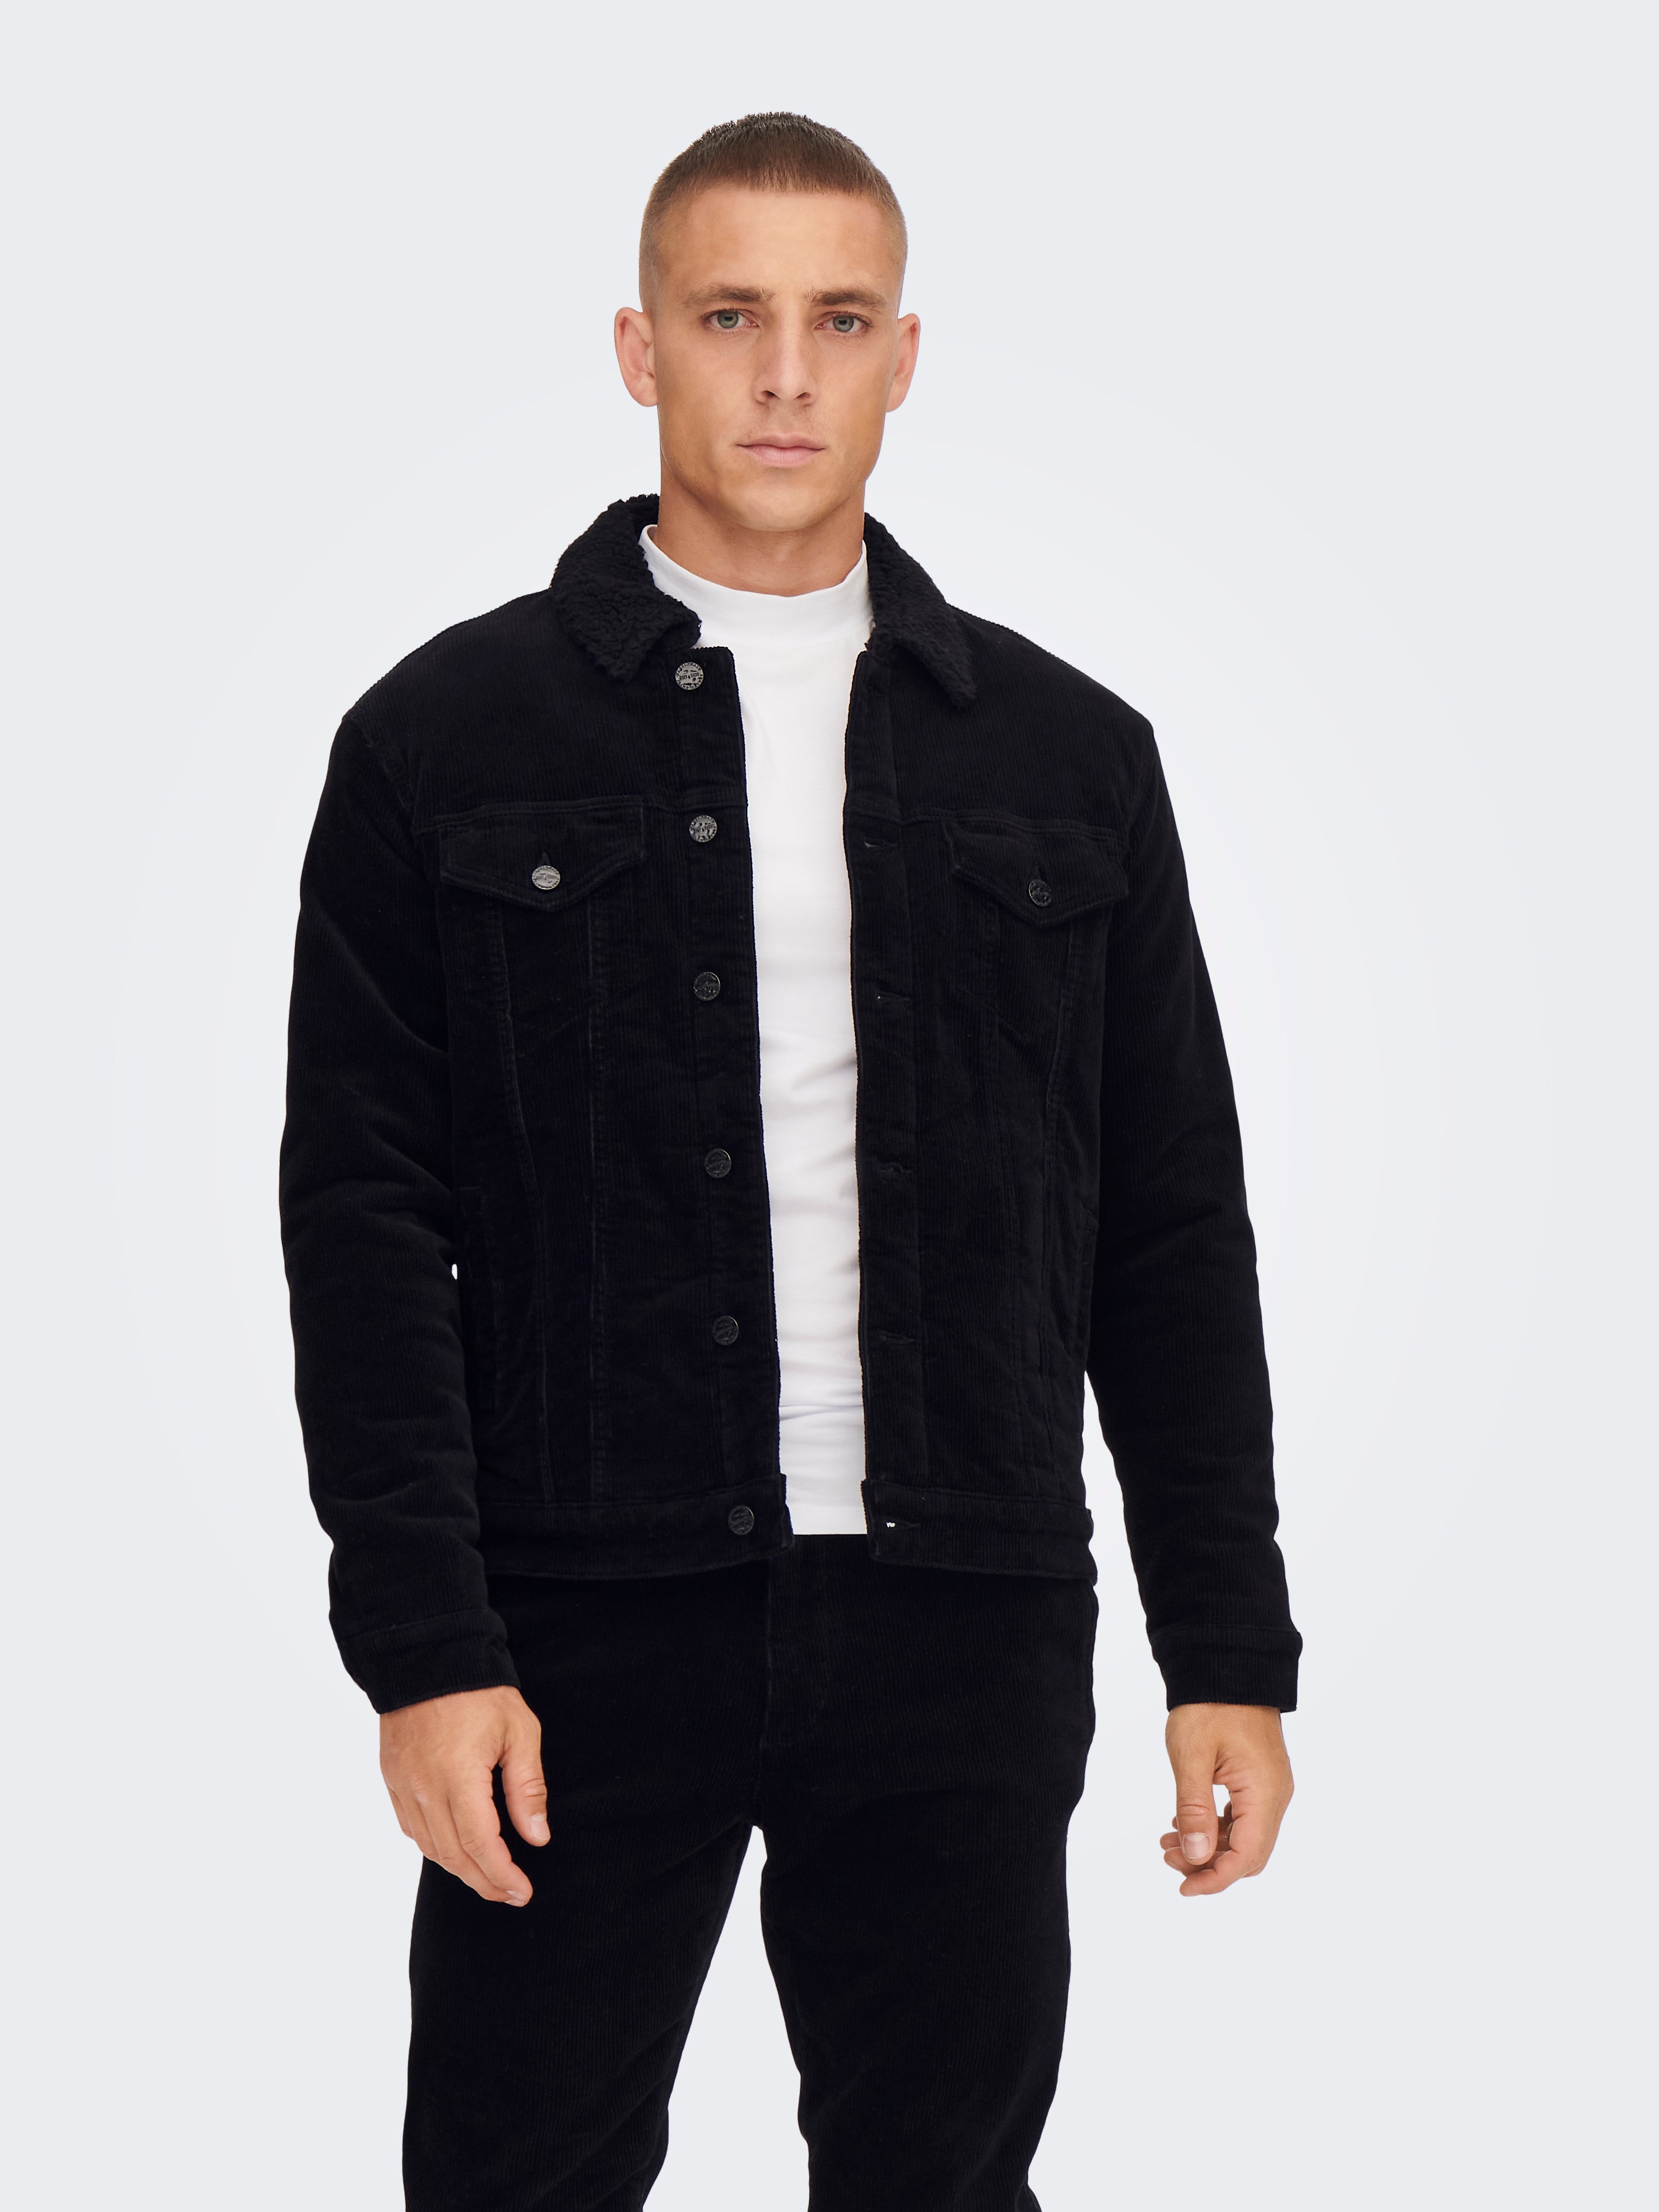 High neck Jacket with 30 discount! | ONLY & SONS®